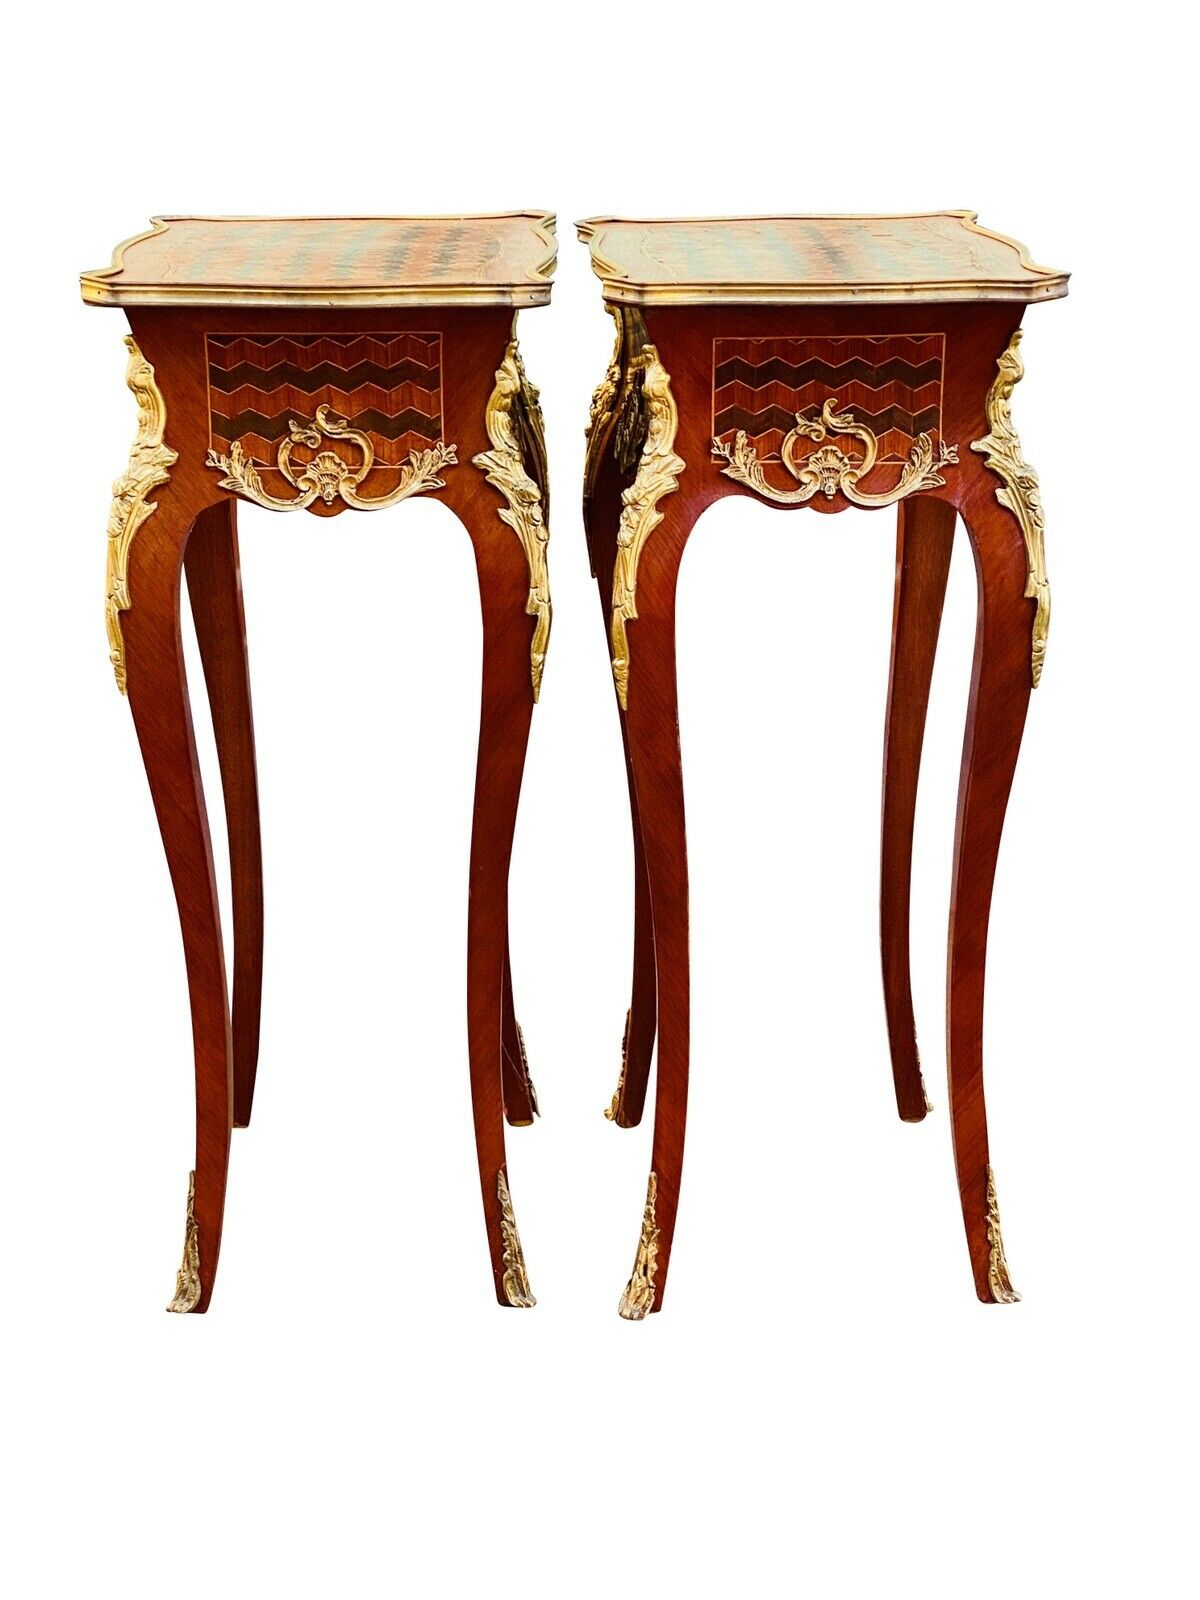 20TH C LOUIS XV ANTIQUE STYLE PAIR OF FRENCH PARQUETRY NIGHT STANDS / END TABLES